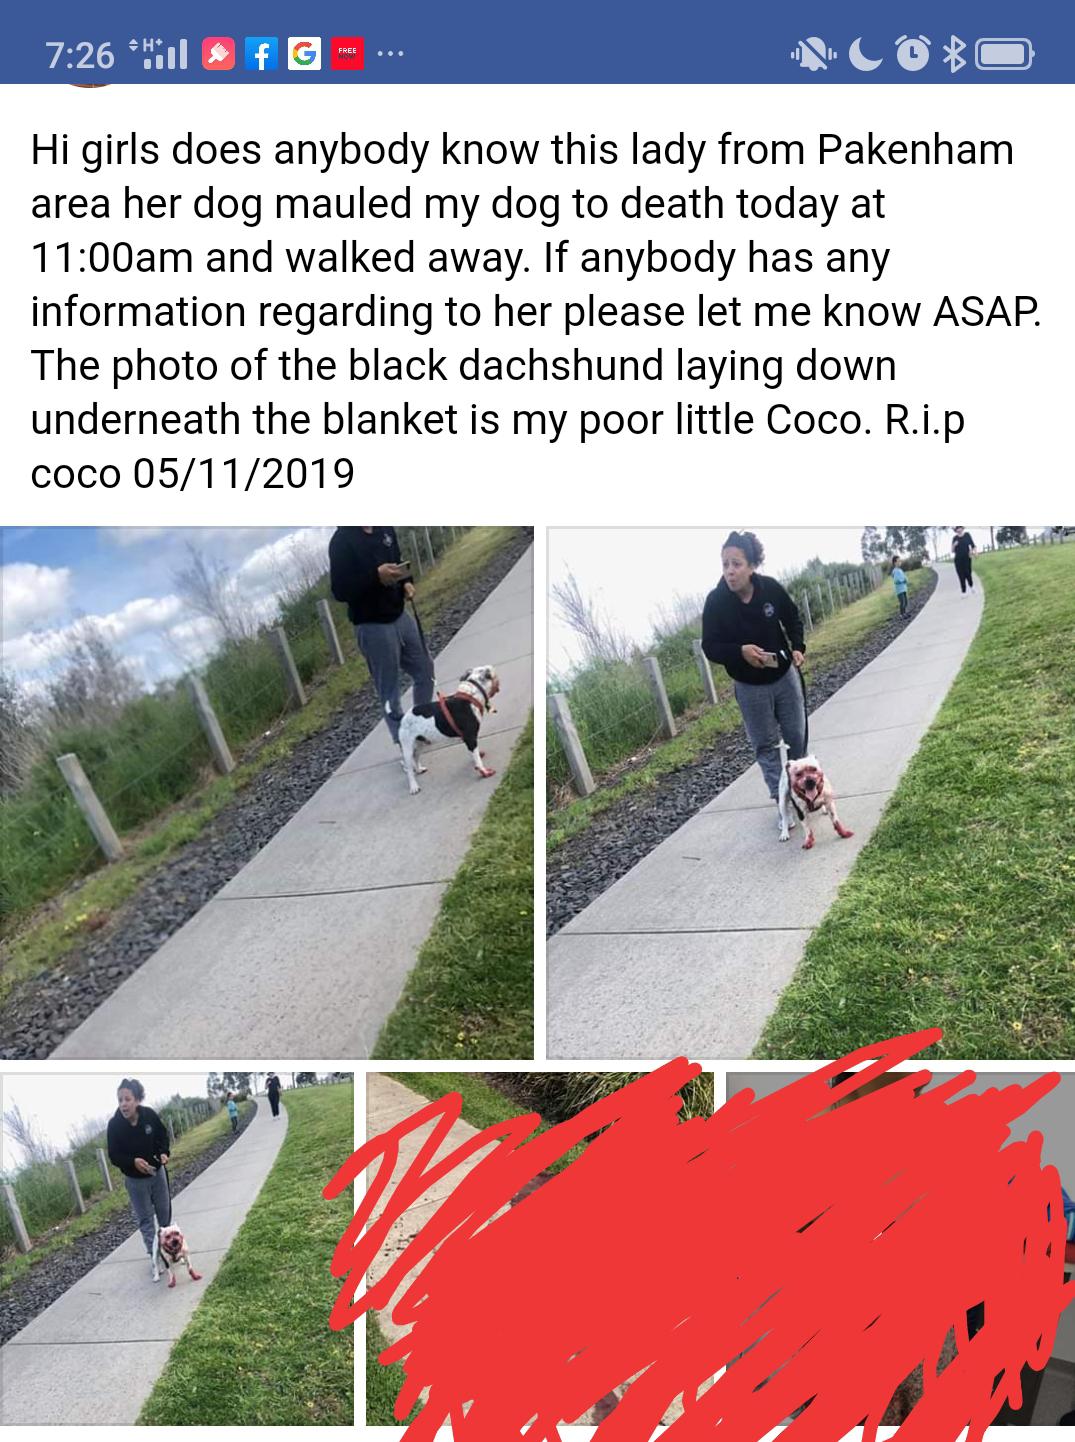 asphalt - Hill f G ... Hi girls does anybody know this lady from Pakenham area her dog mauled my dog to death today at am and walked away. If anybody has any information regarding to her please let me know Asap. The photo of the black dachshund laying dow